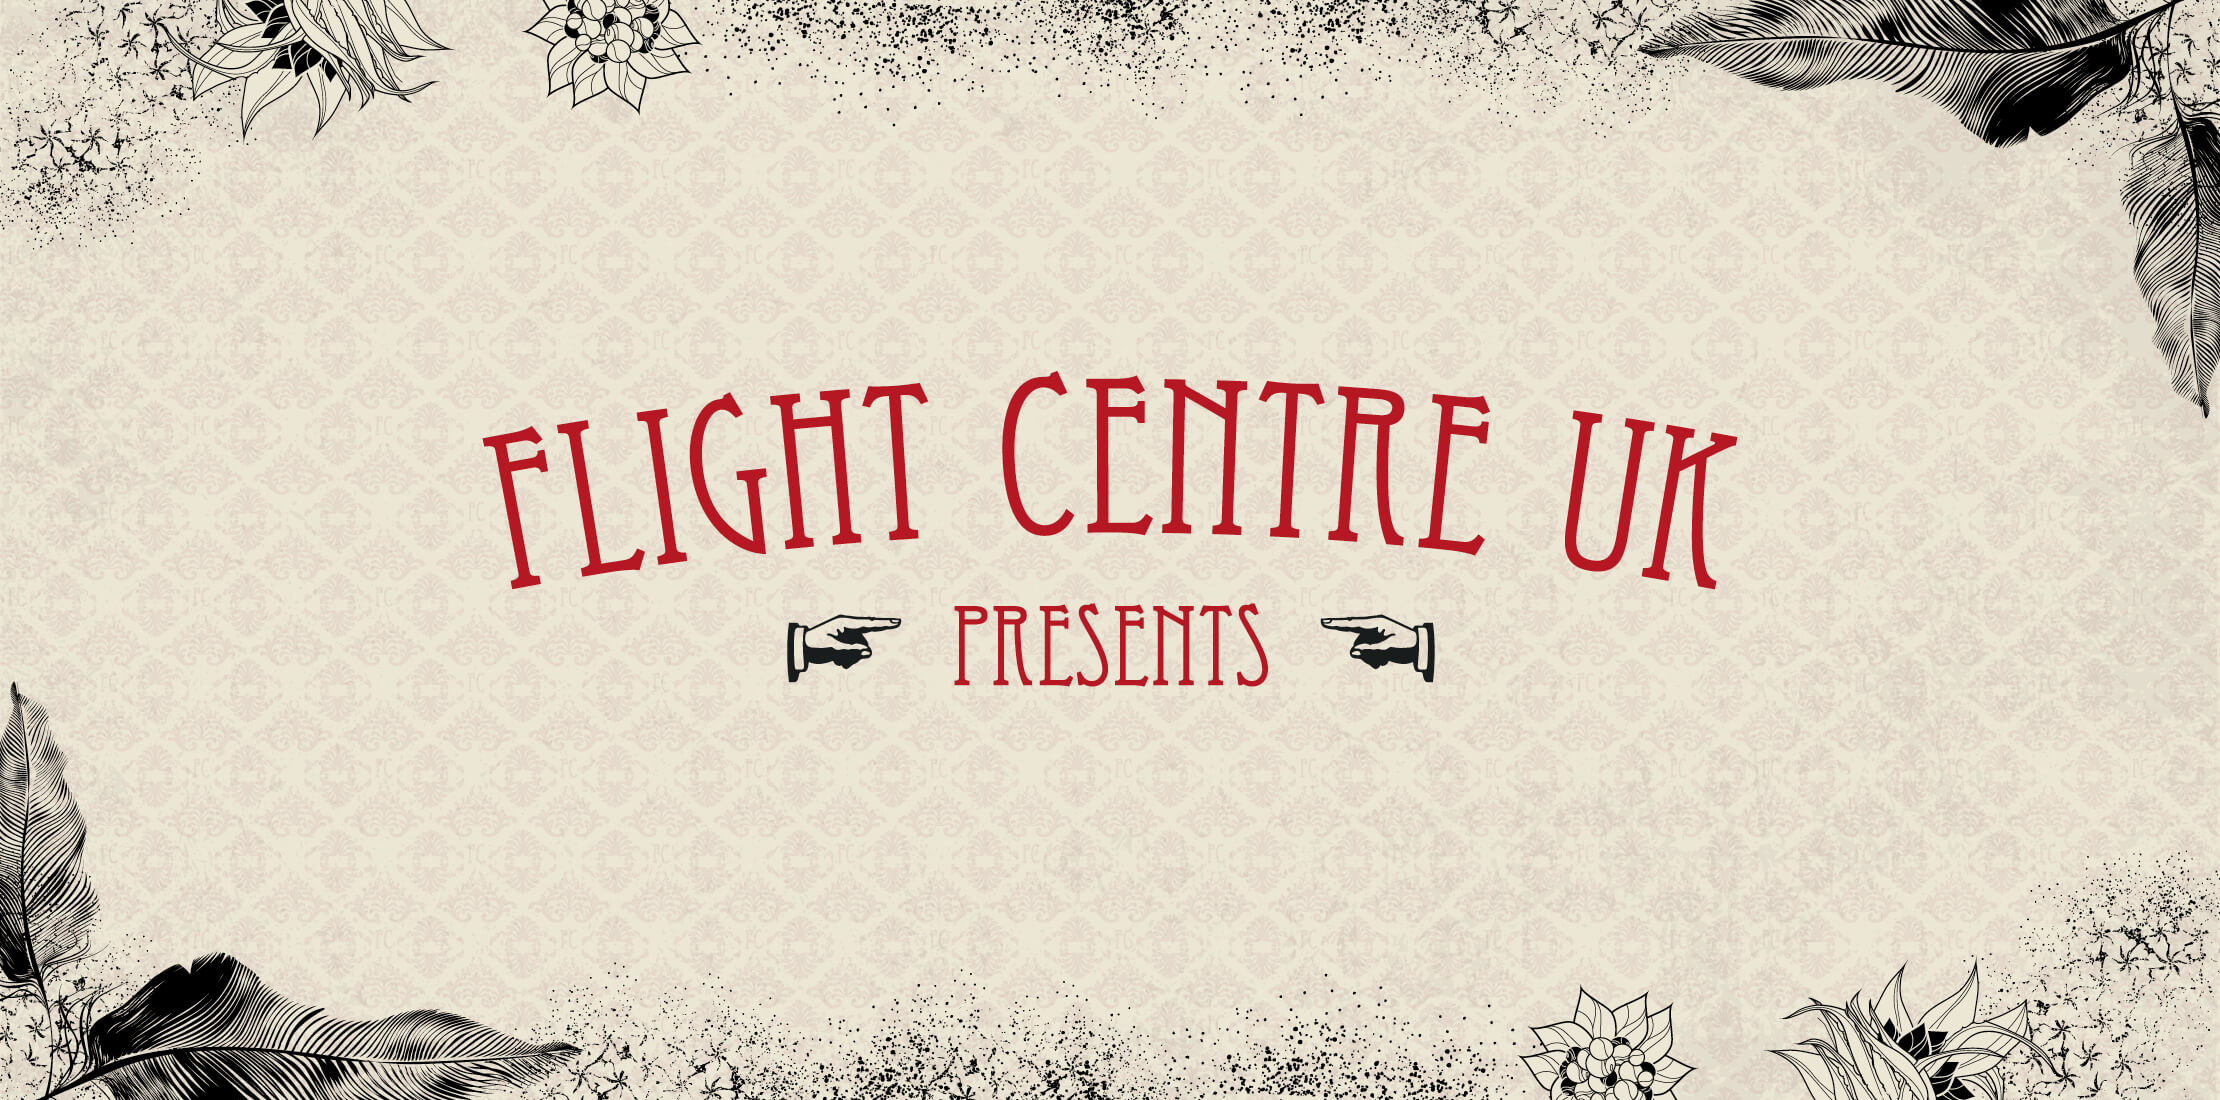 Flight Centre UK Presents banner written in a curve in a deep red colour, using an art deco font on a beige patterned background